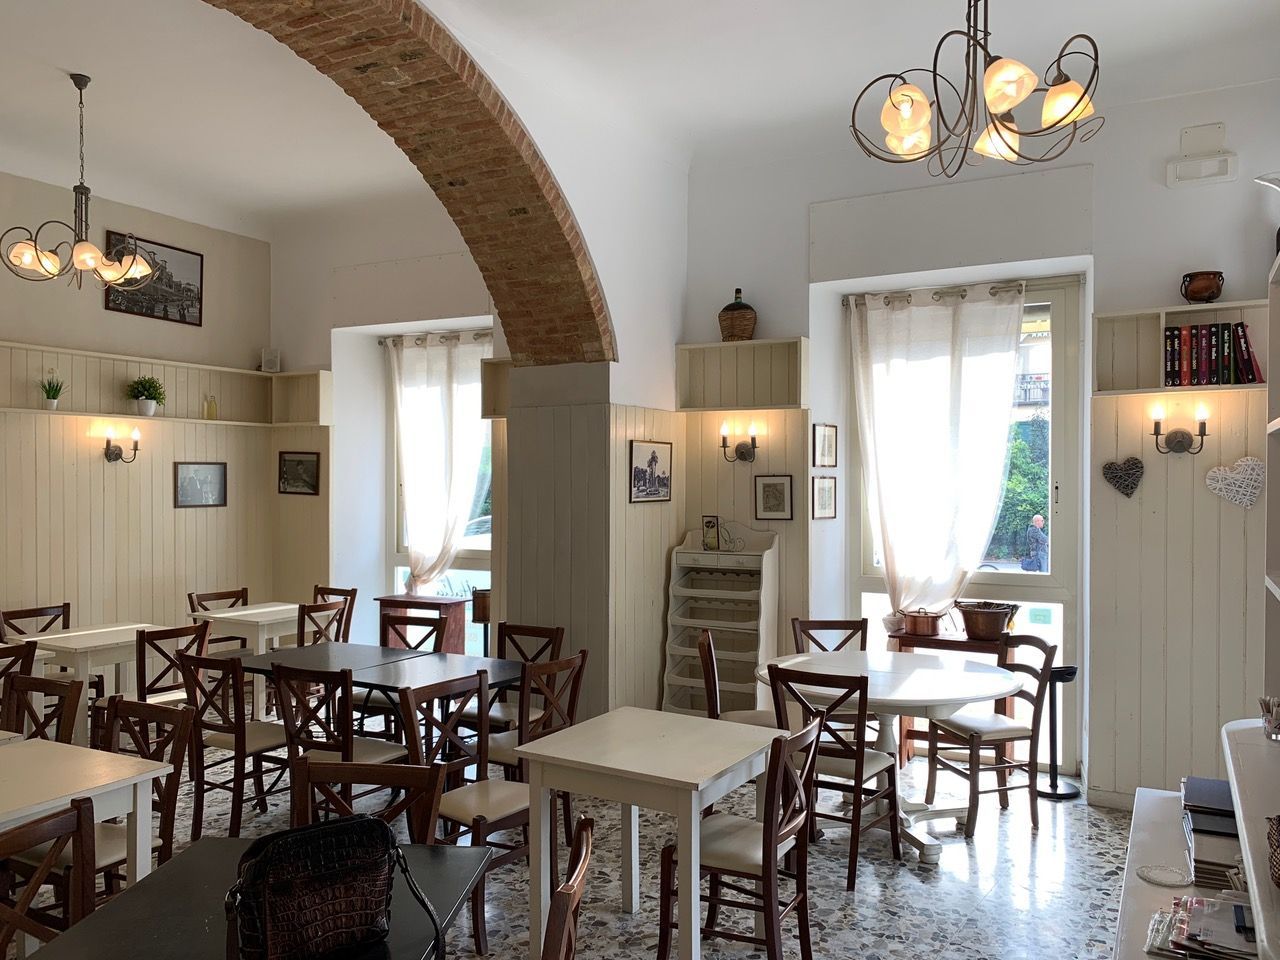 Cafe, restaurant in San Remo, Italy, 100 sq.m - picture 1